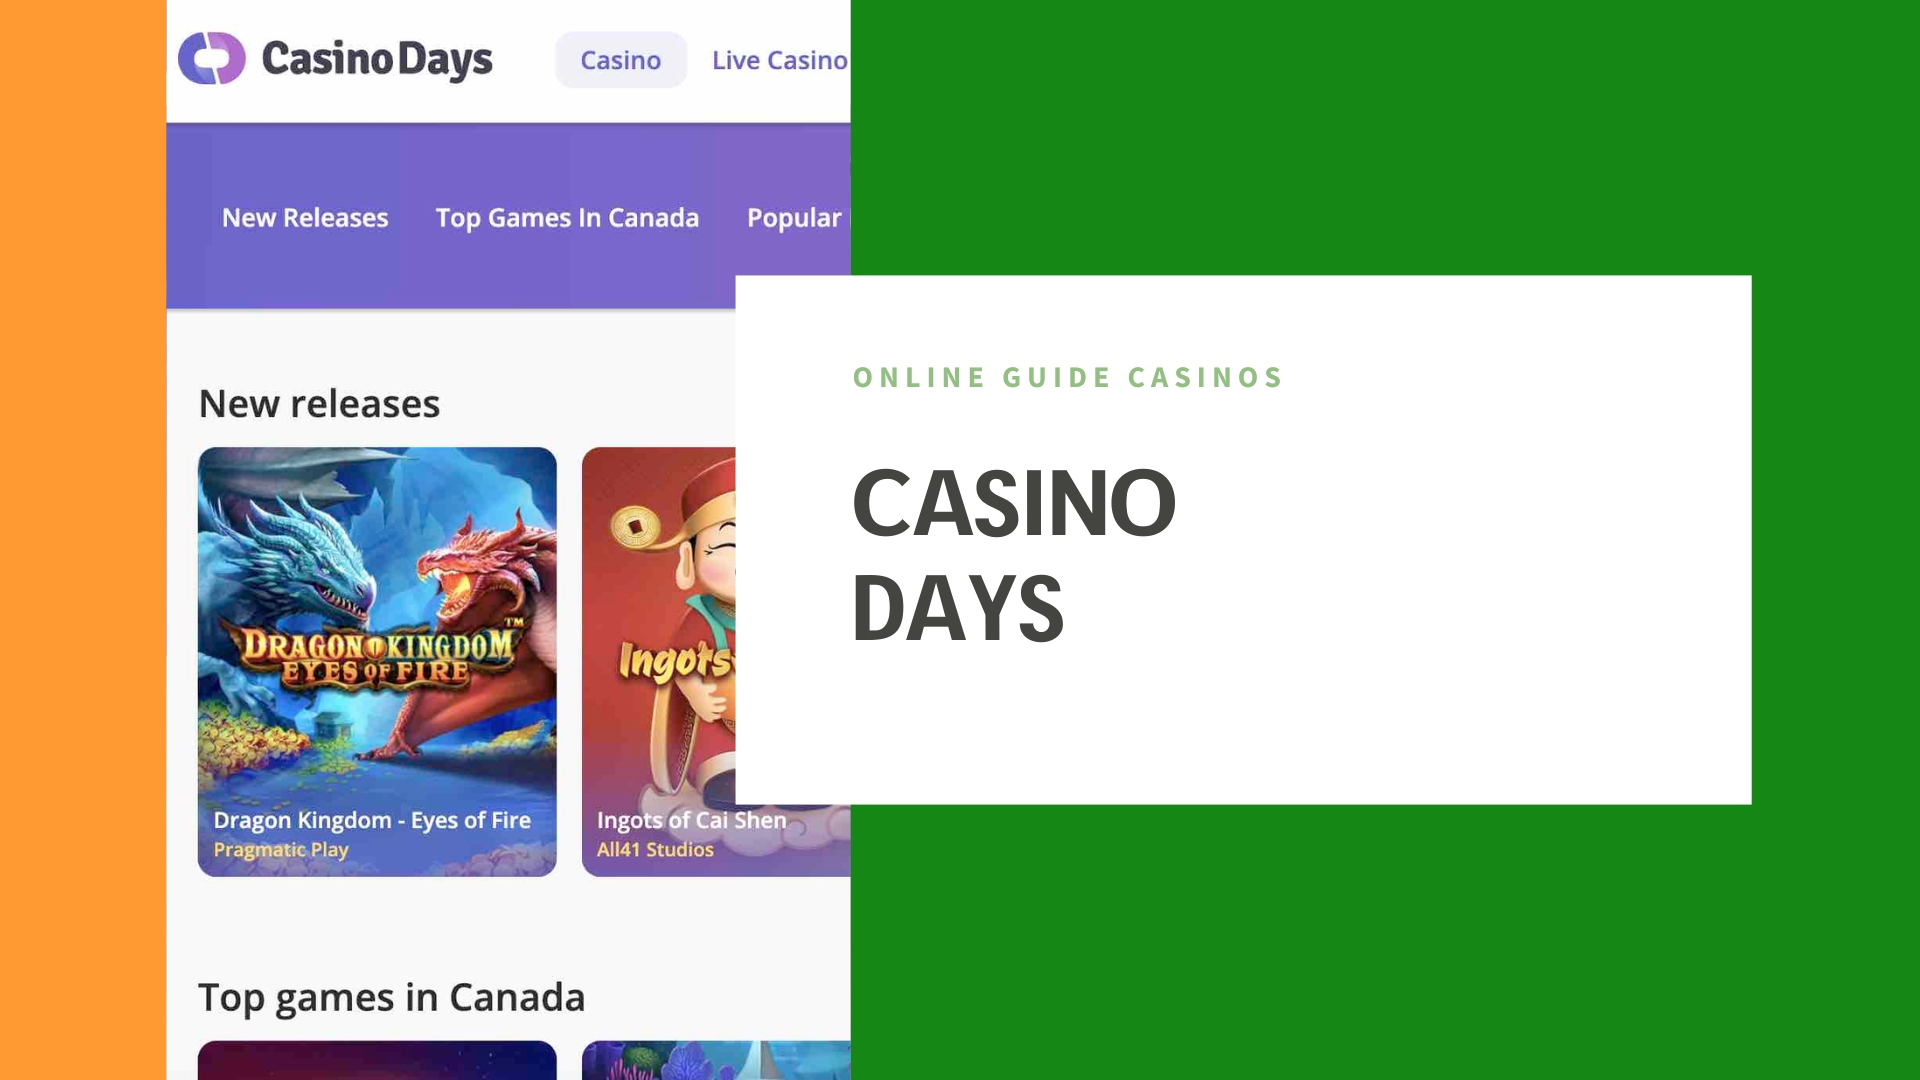 Casino Days in India: a little about the company